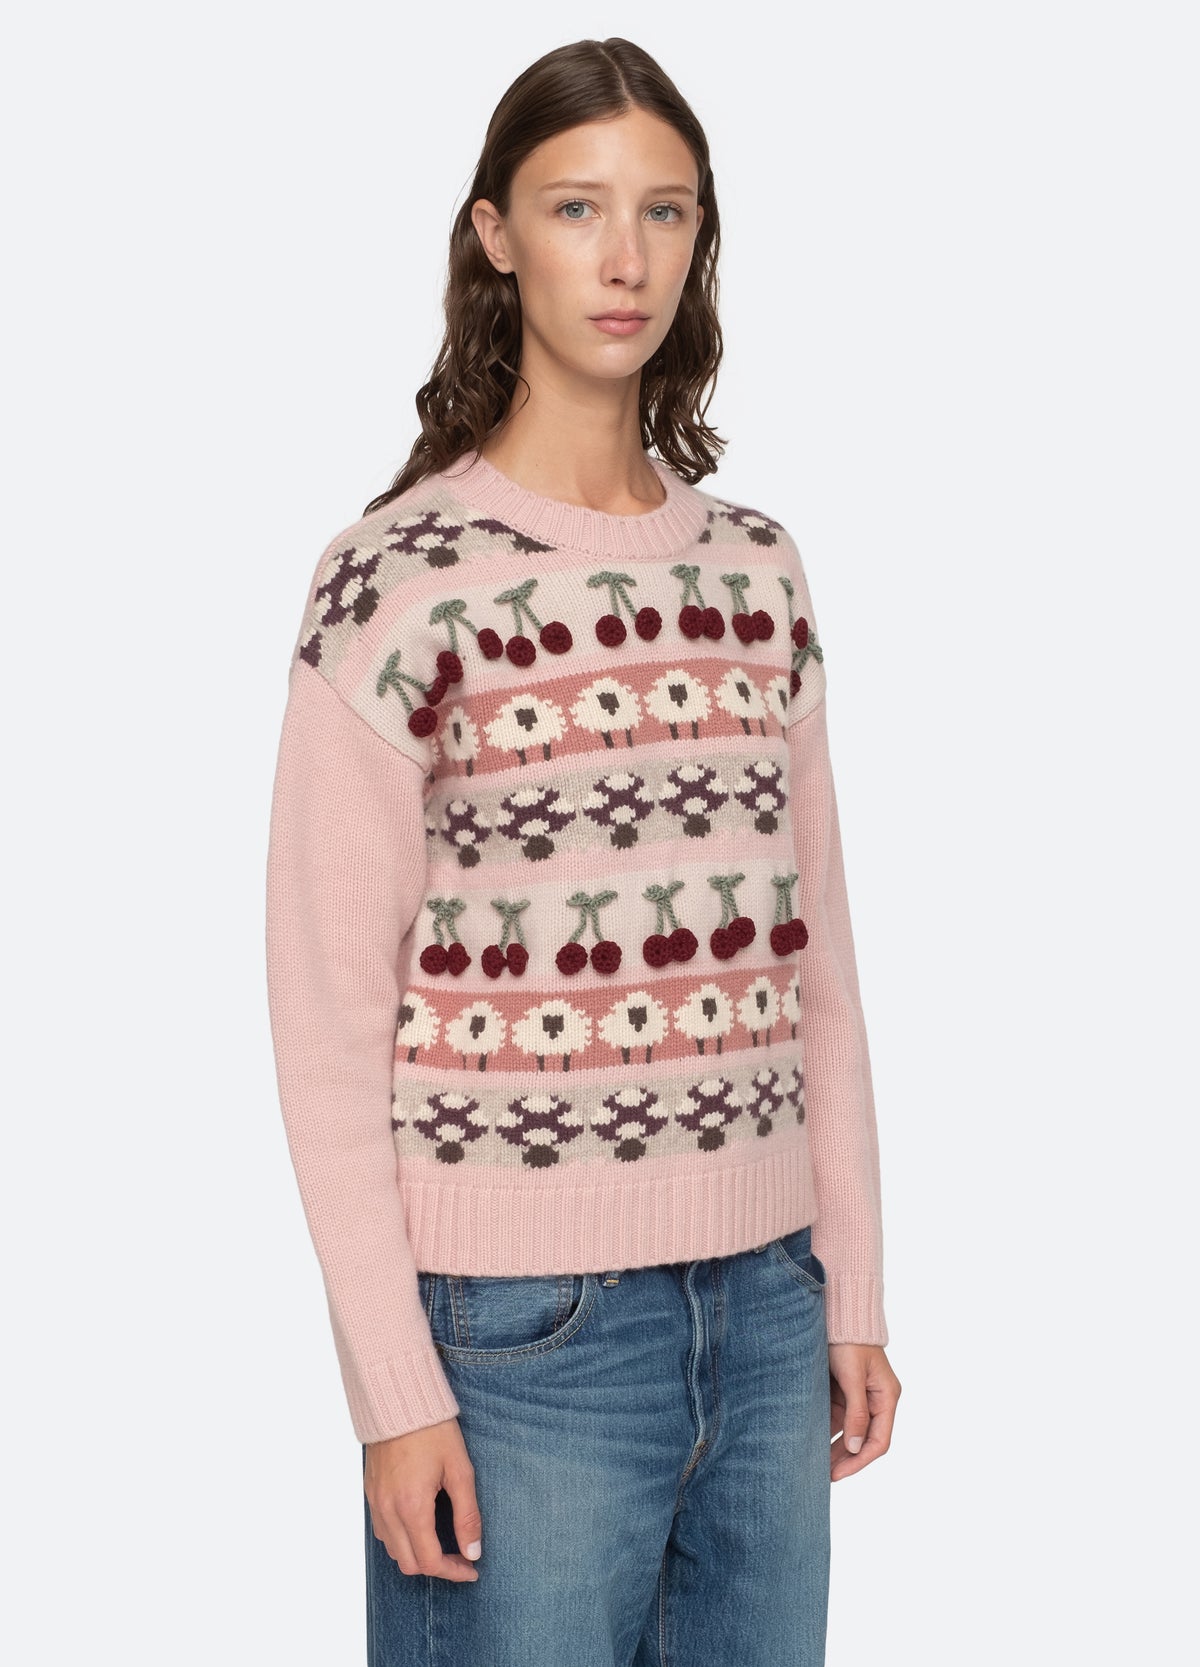 pink-molly sweater-three quarter view - 13